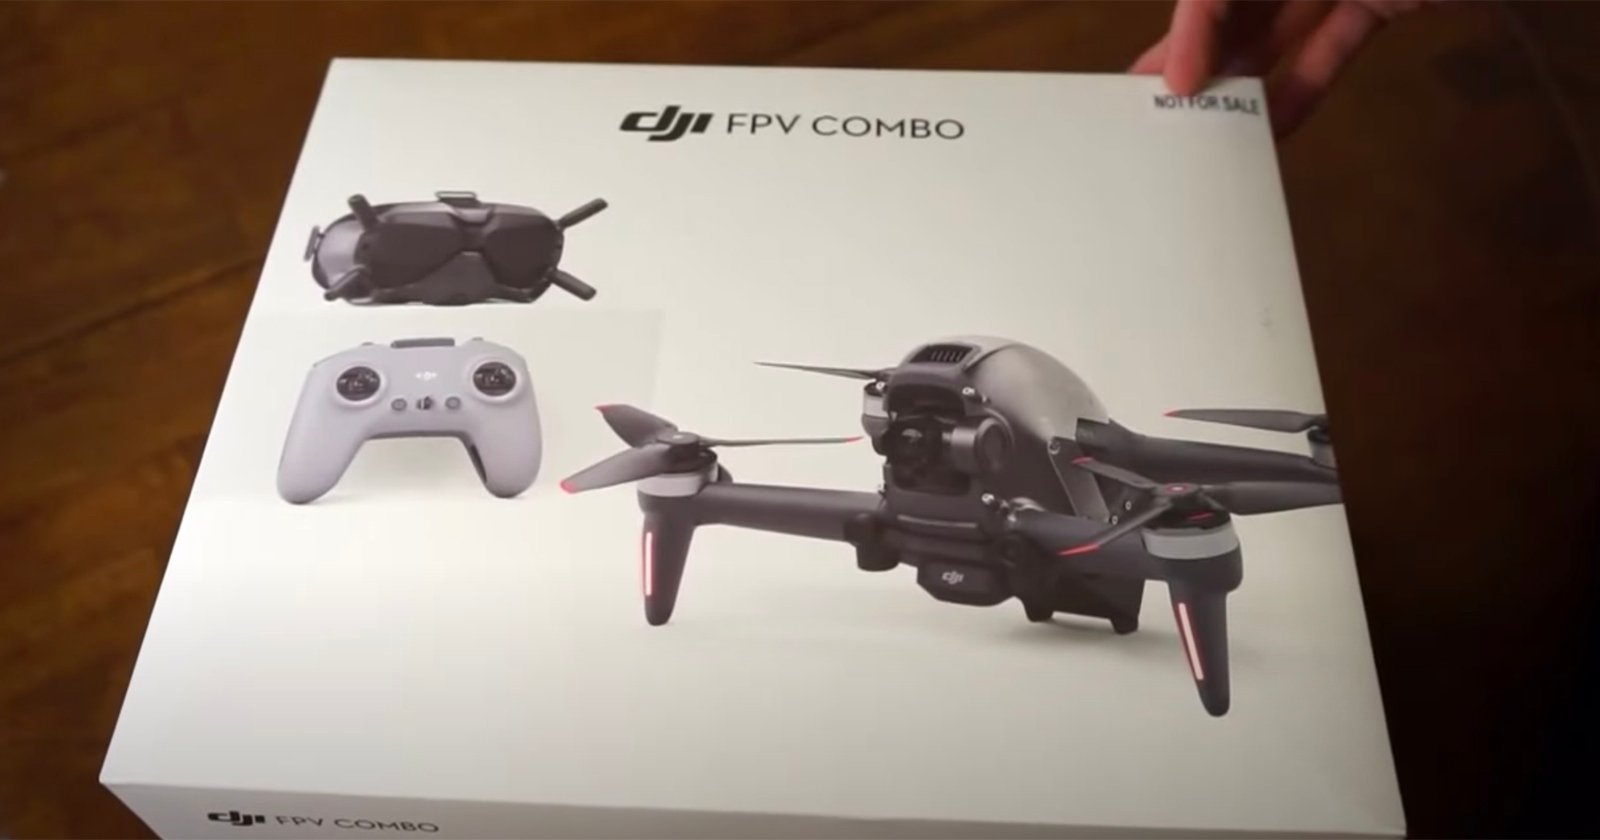 DJI’s upcoming FPV drone leaks in full unboxing video